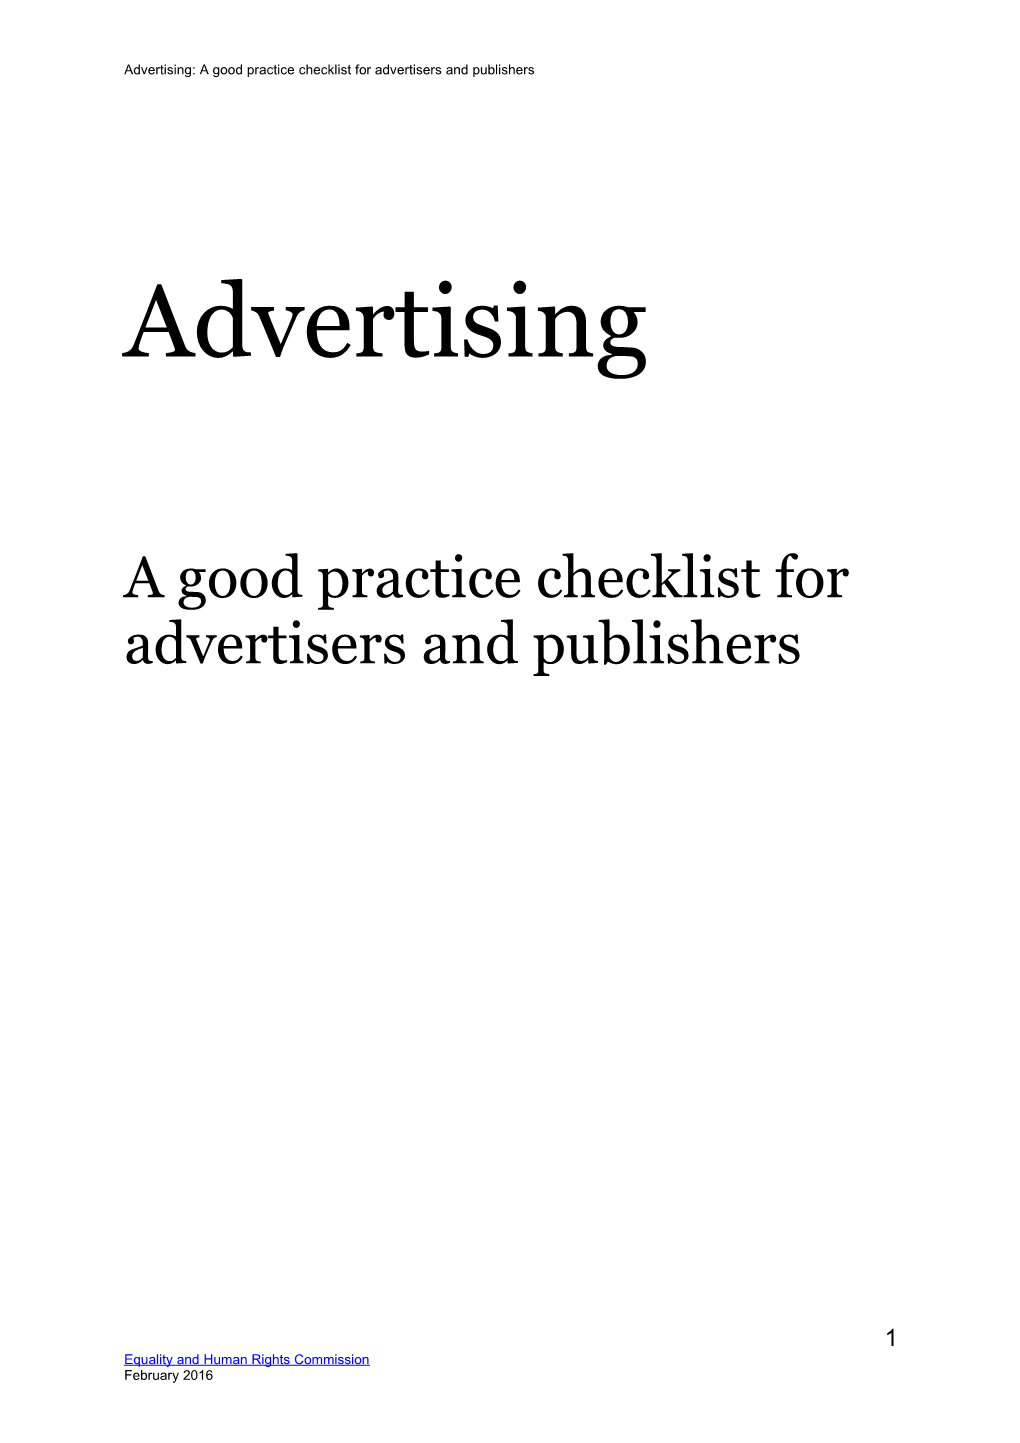 Advertising: a Good Practice Checklist for Advertisers and Publishers